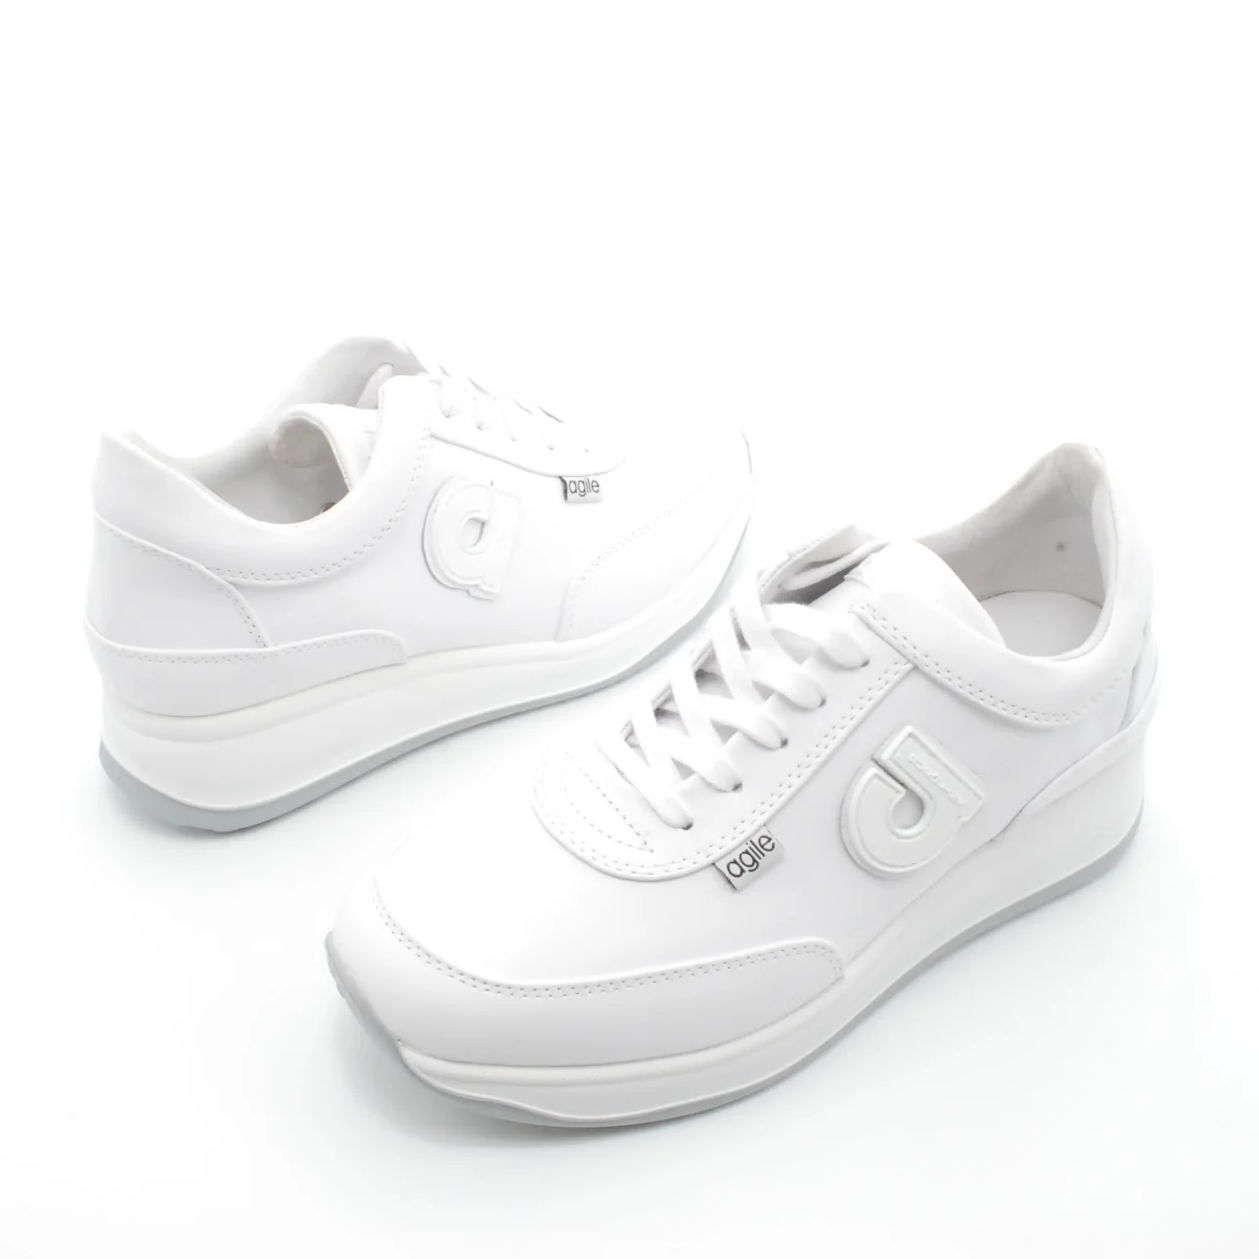 sneakers-agile-by-rucoline-sneakers-2_afc10018-7ef0-4f1e-9109-b7478af21ce5.png